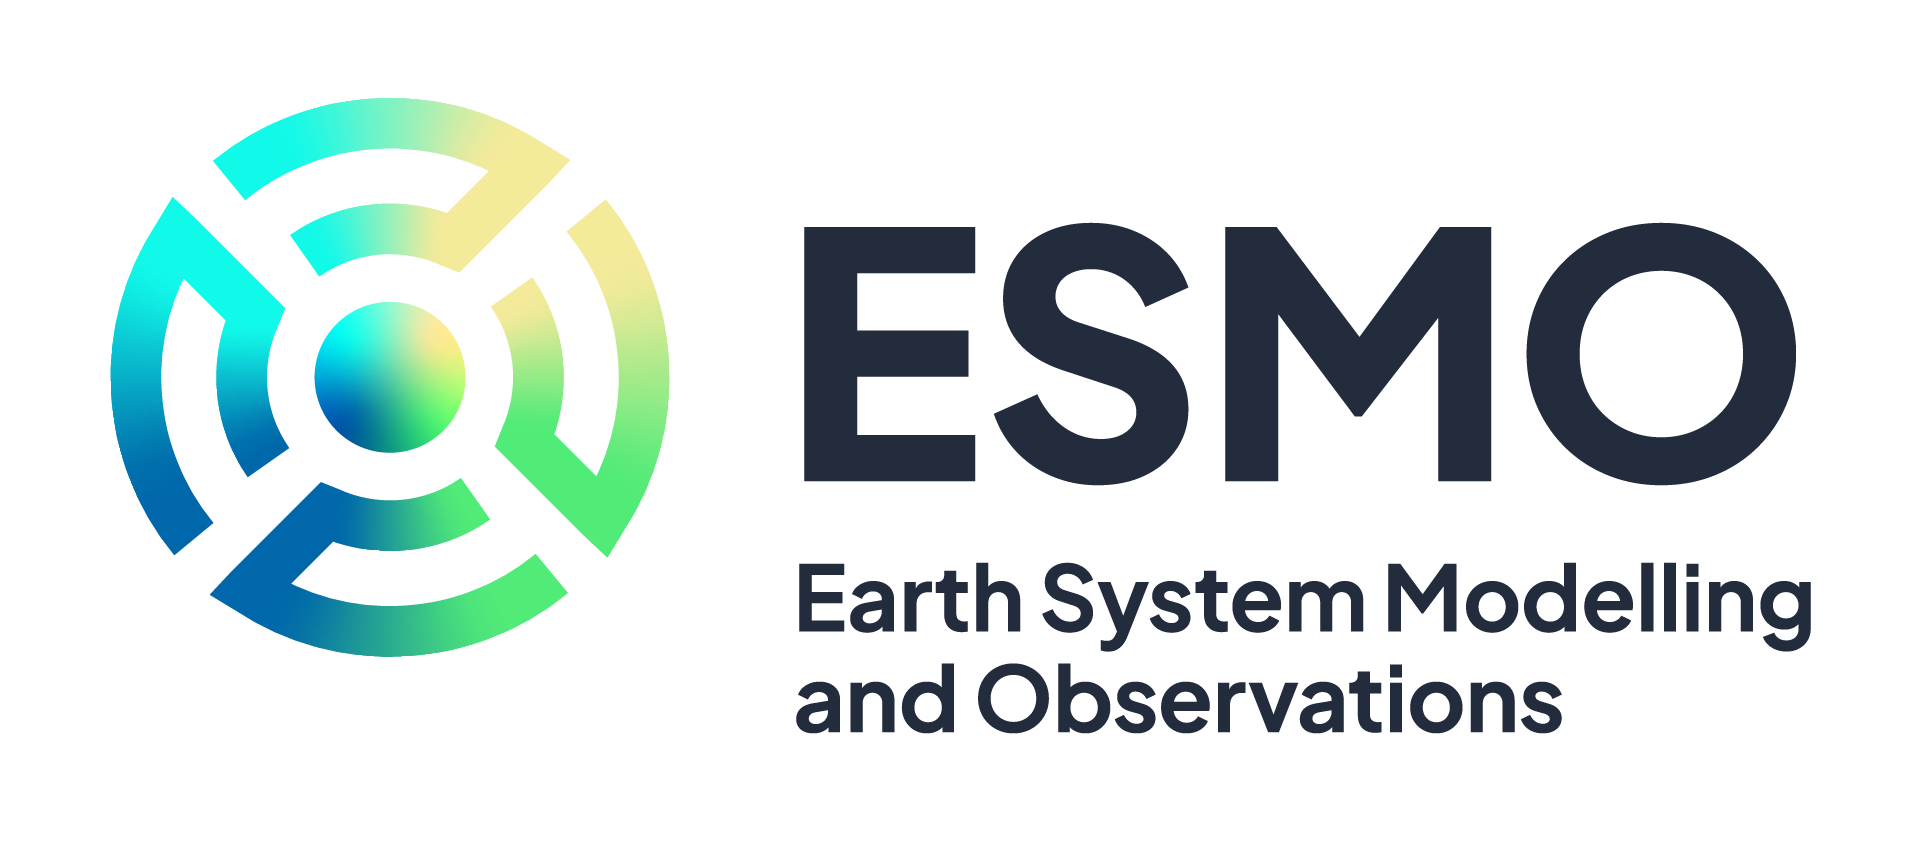 EEarth System Modelling and Observations (ESMO)